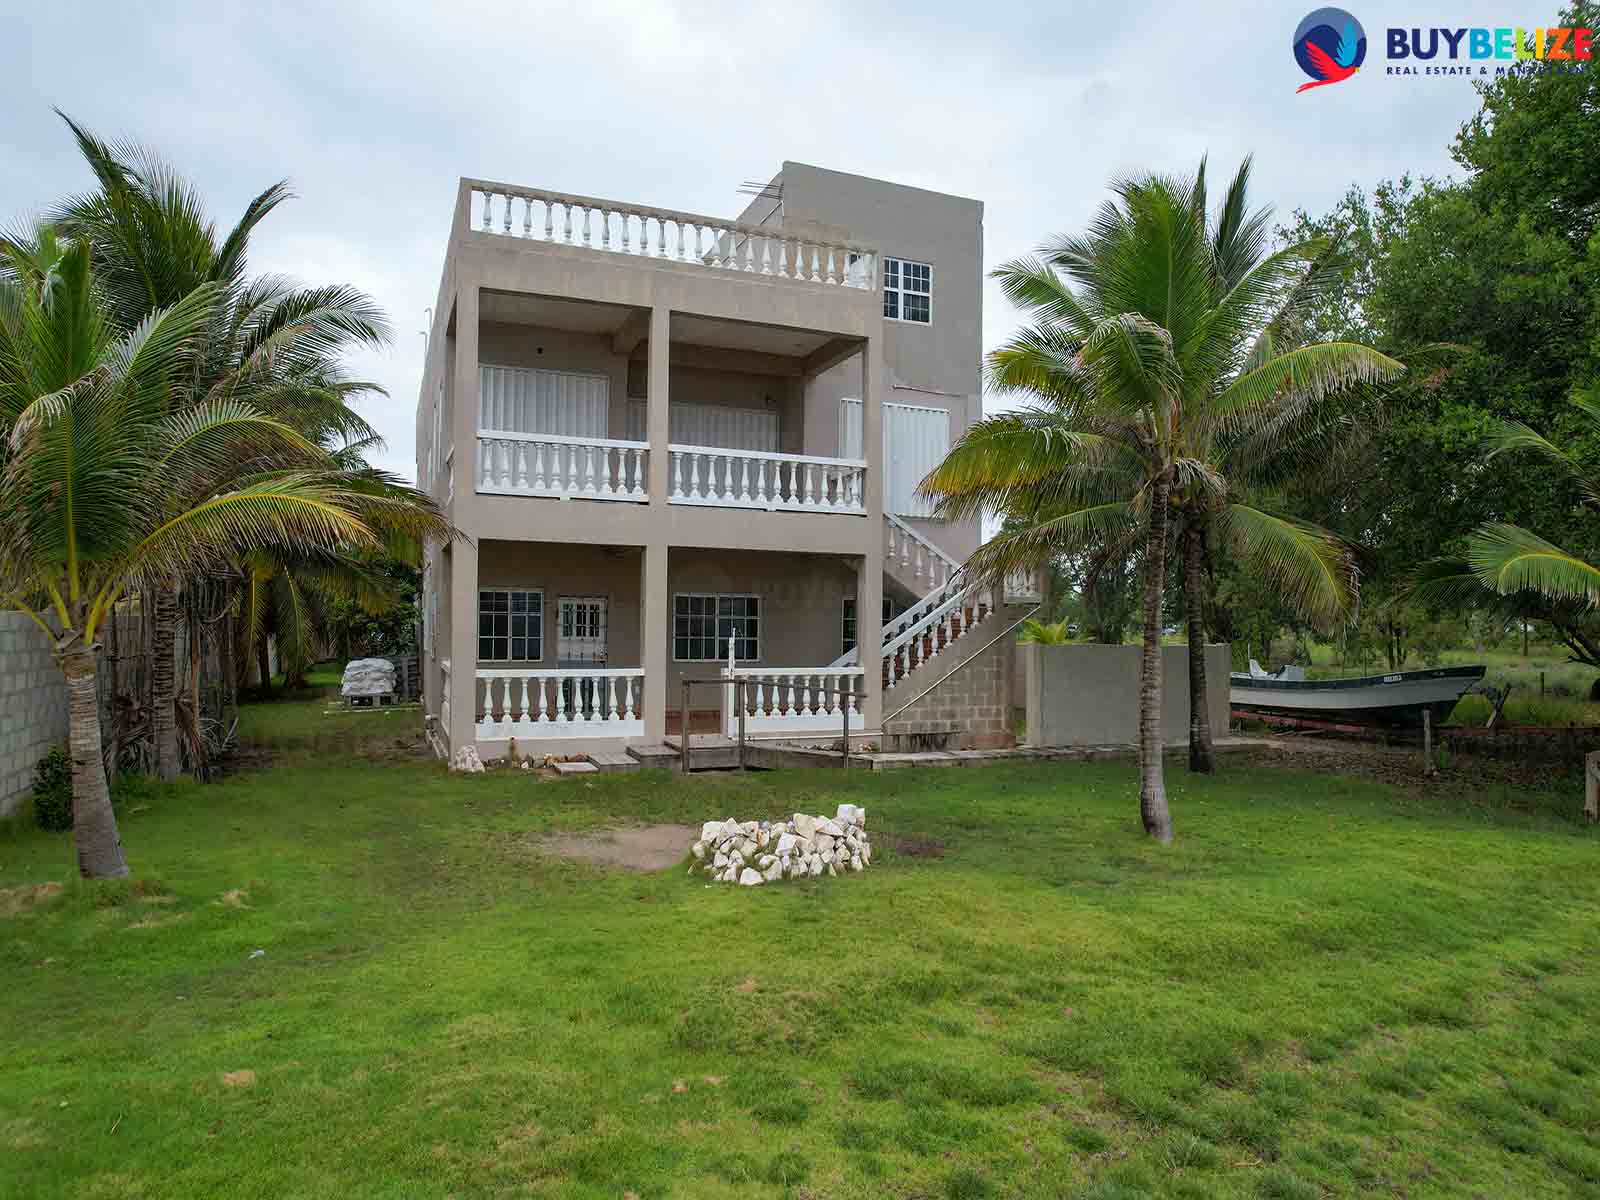 Beach front Property FOR SALE in Belize City